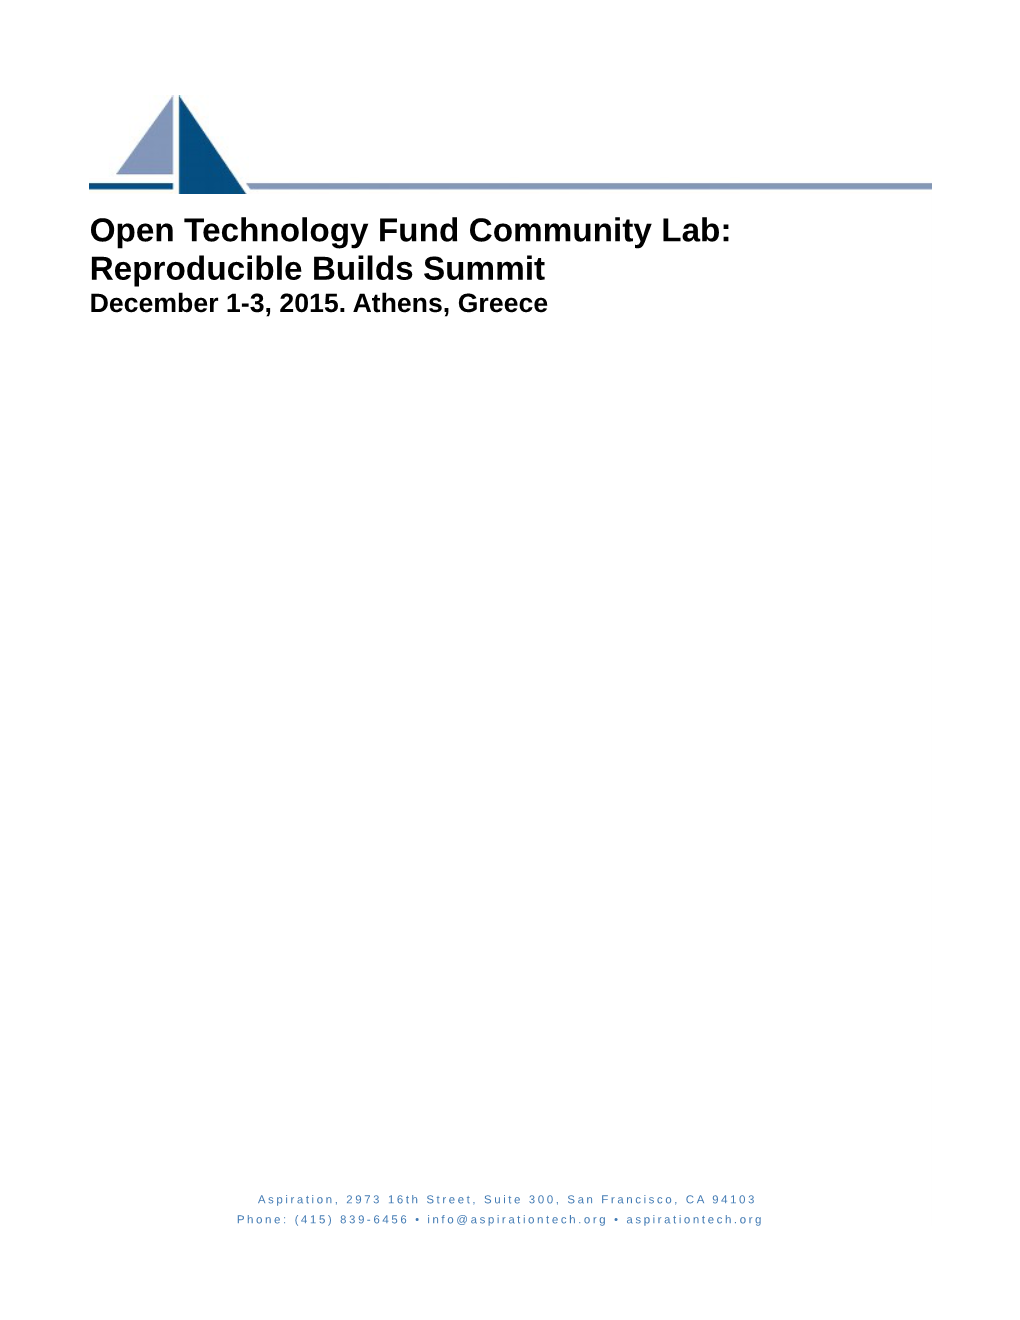 Open Technology Fund Community Lab: Reproducible Builds Summit December 1-3, 2015